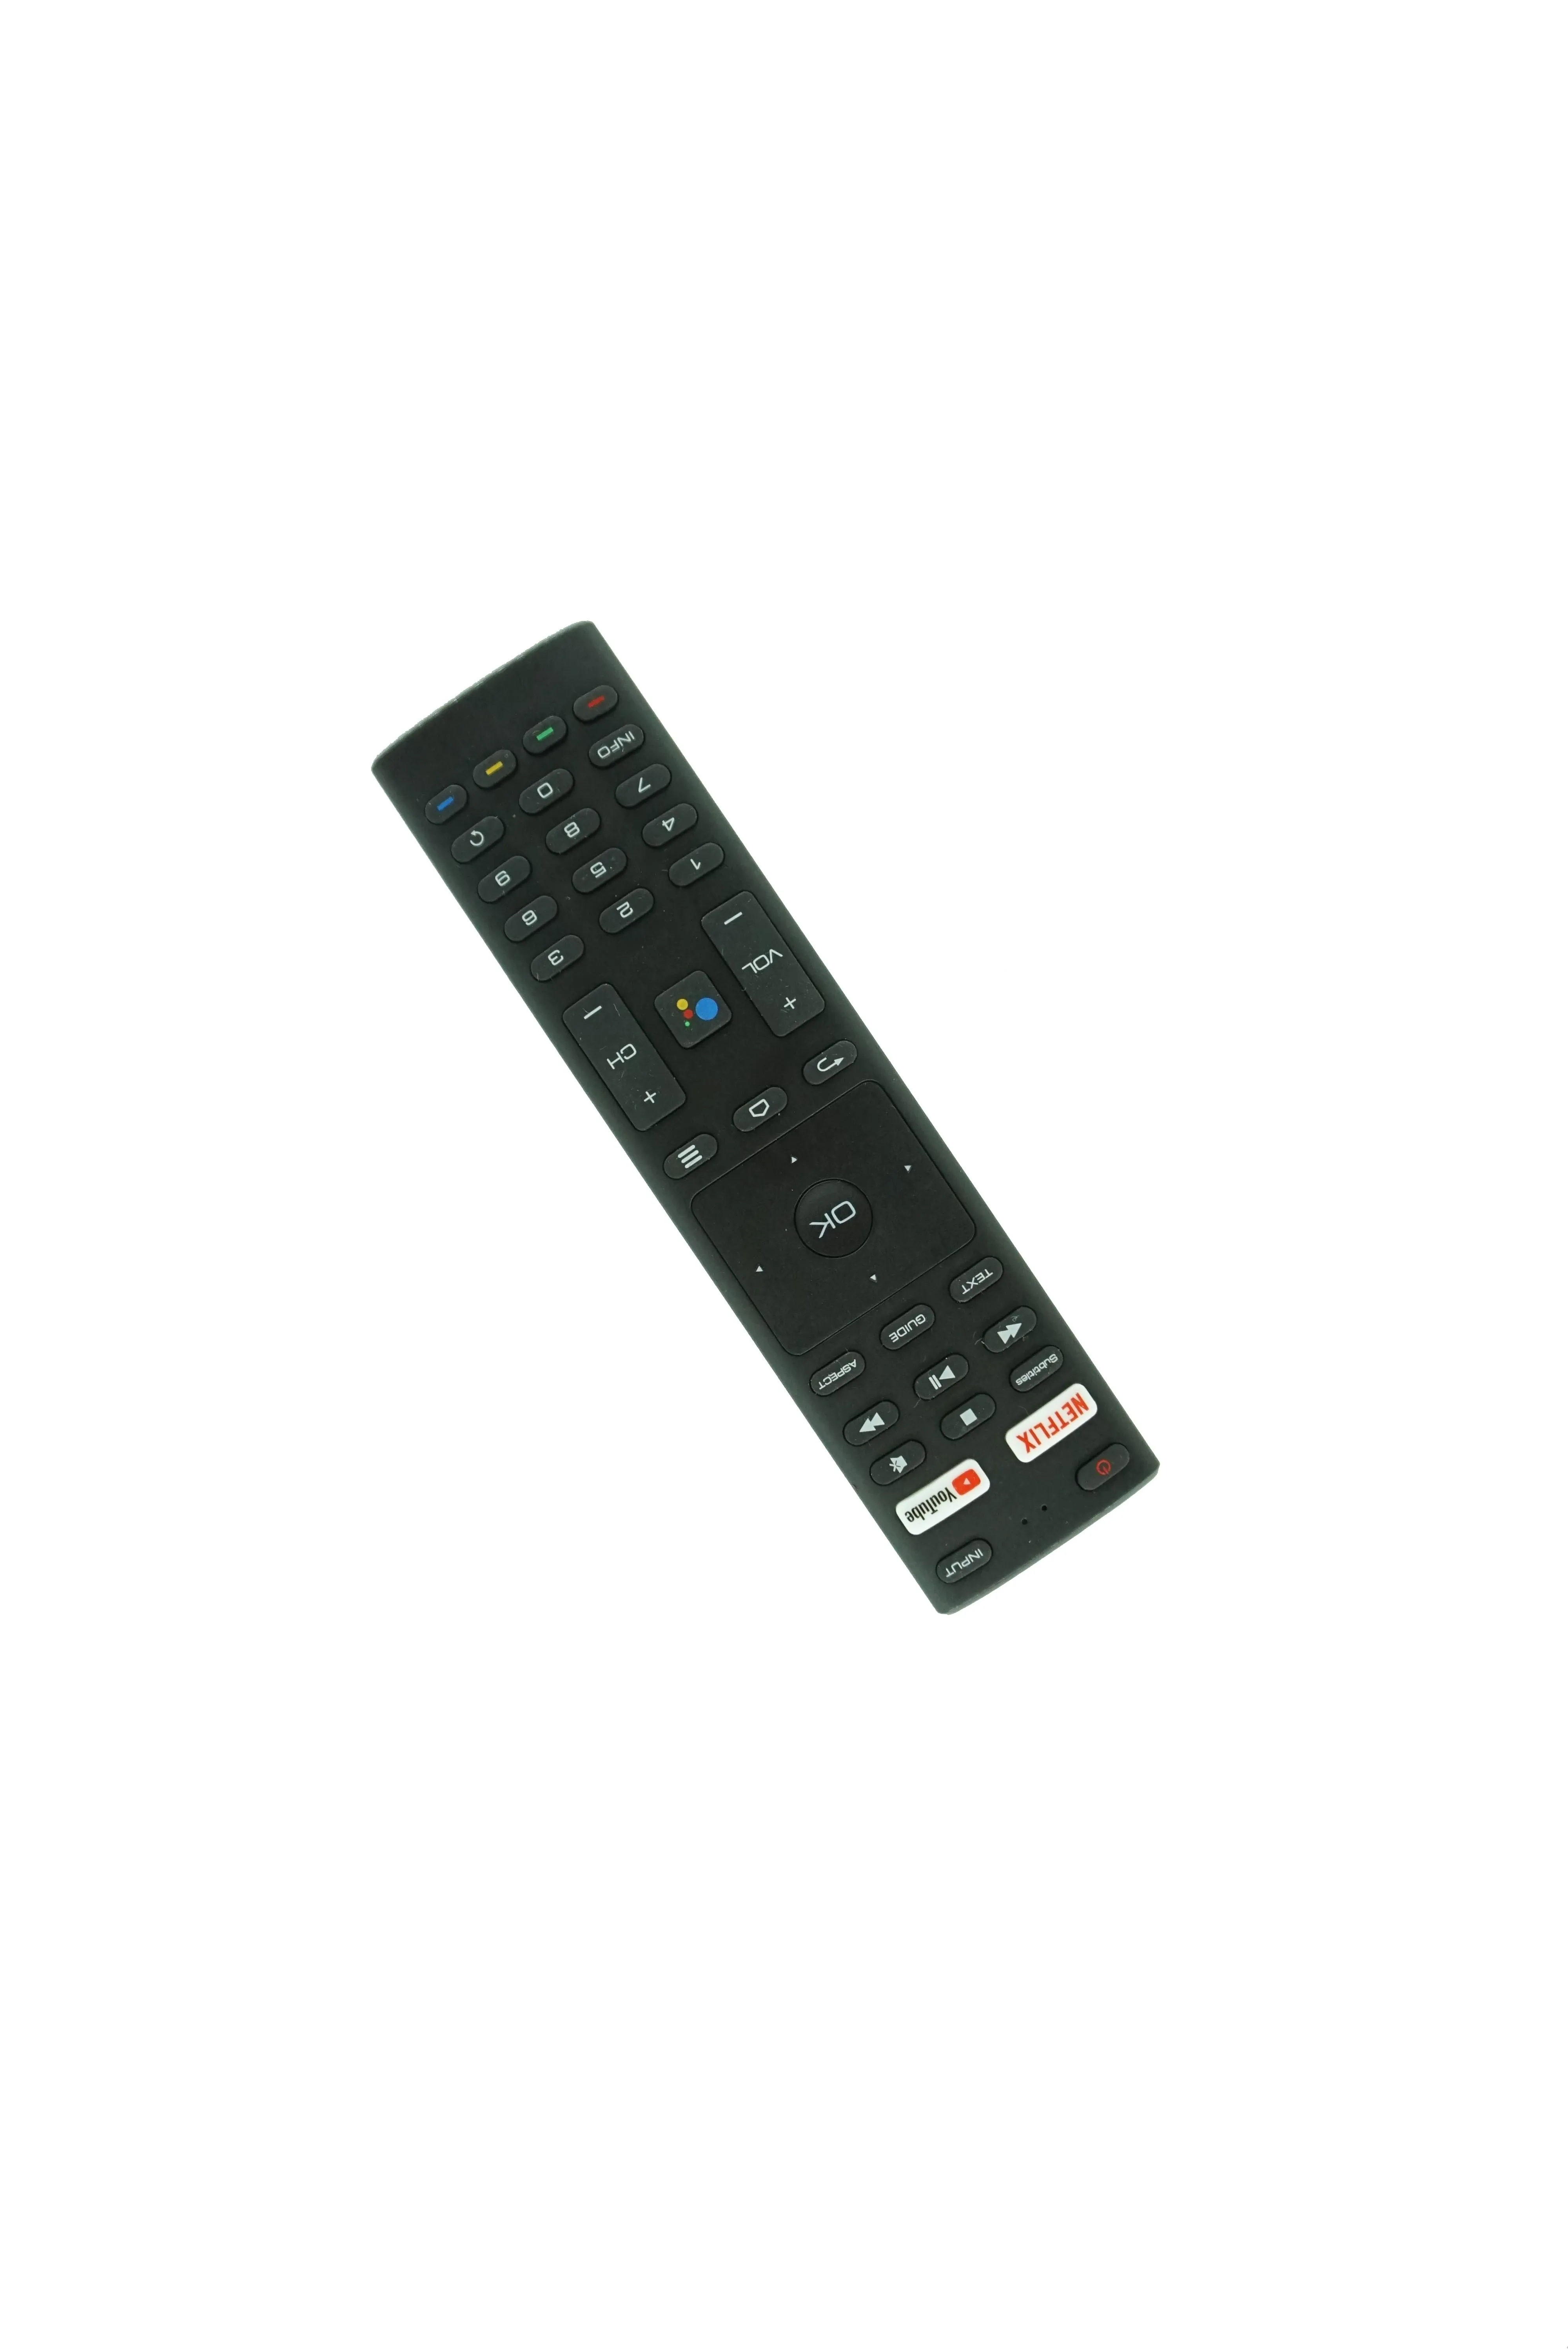 Voice Bluetooth Remote Control f￶r Zephir TAG42-9000 TAG32-7000 TAG32-8900 TAG32-9000 SMART 4K UHD LED LCD HDTV Android TV